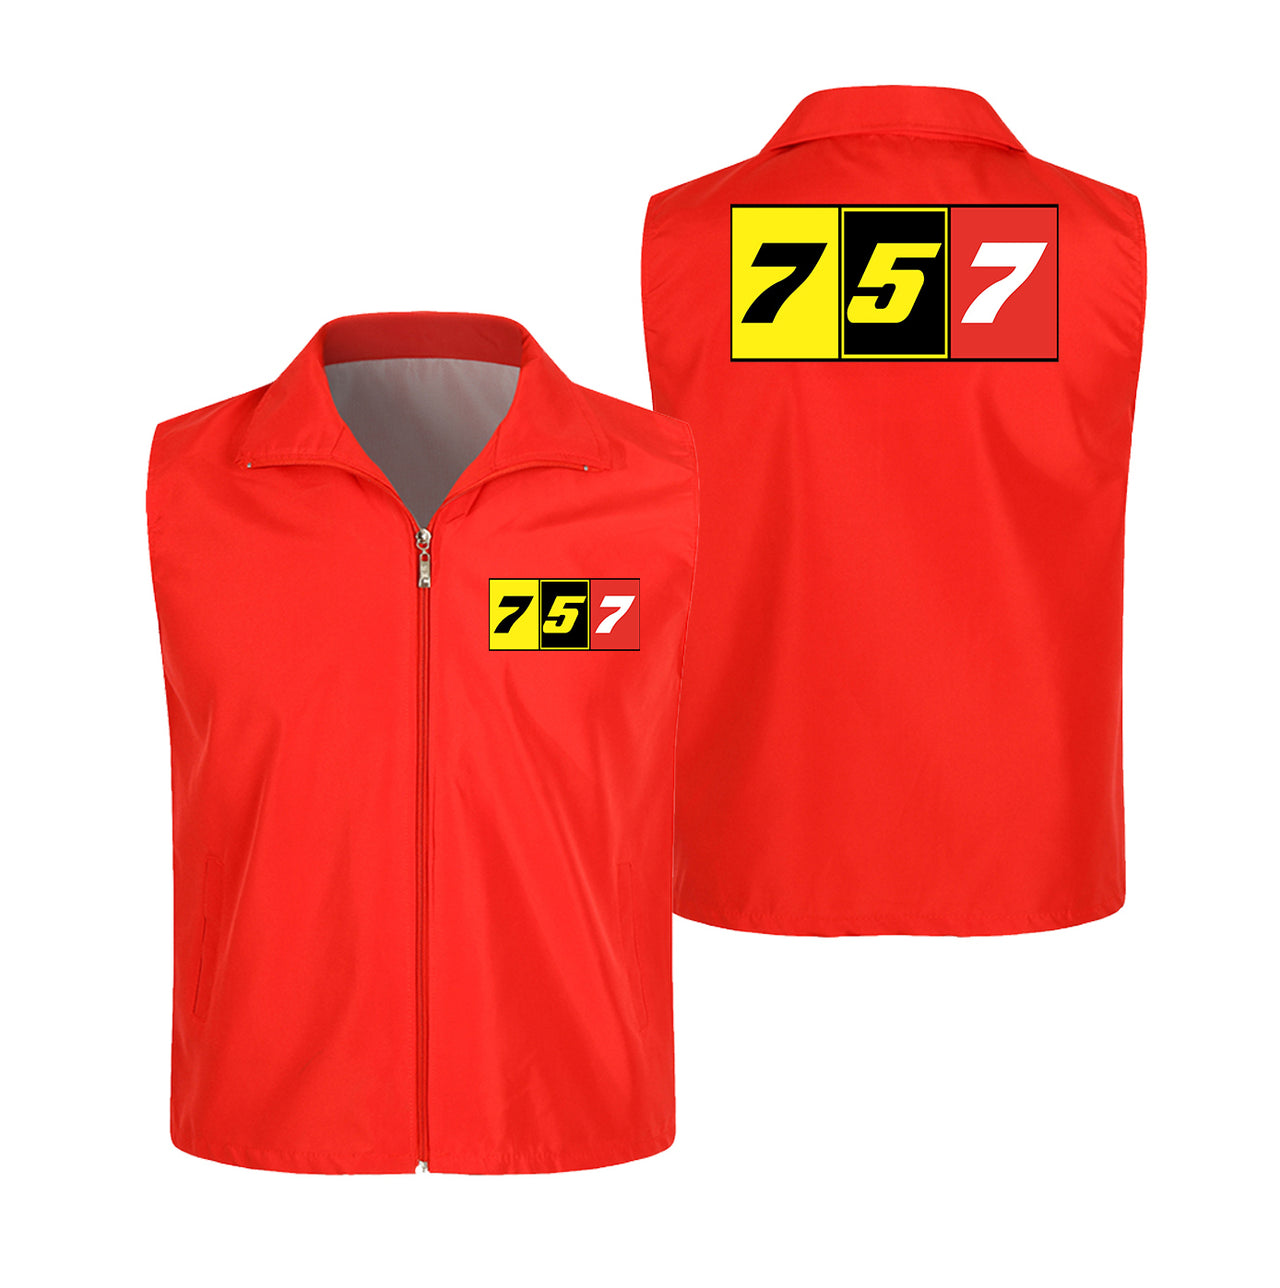 Flat Colourful 757 Designed Thin Style Vests